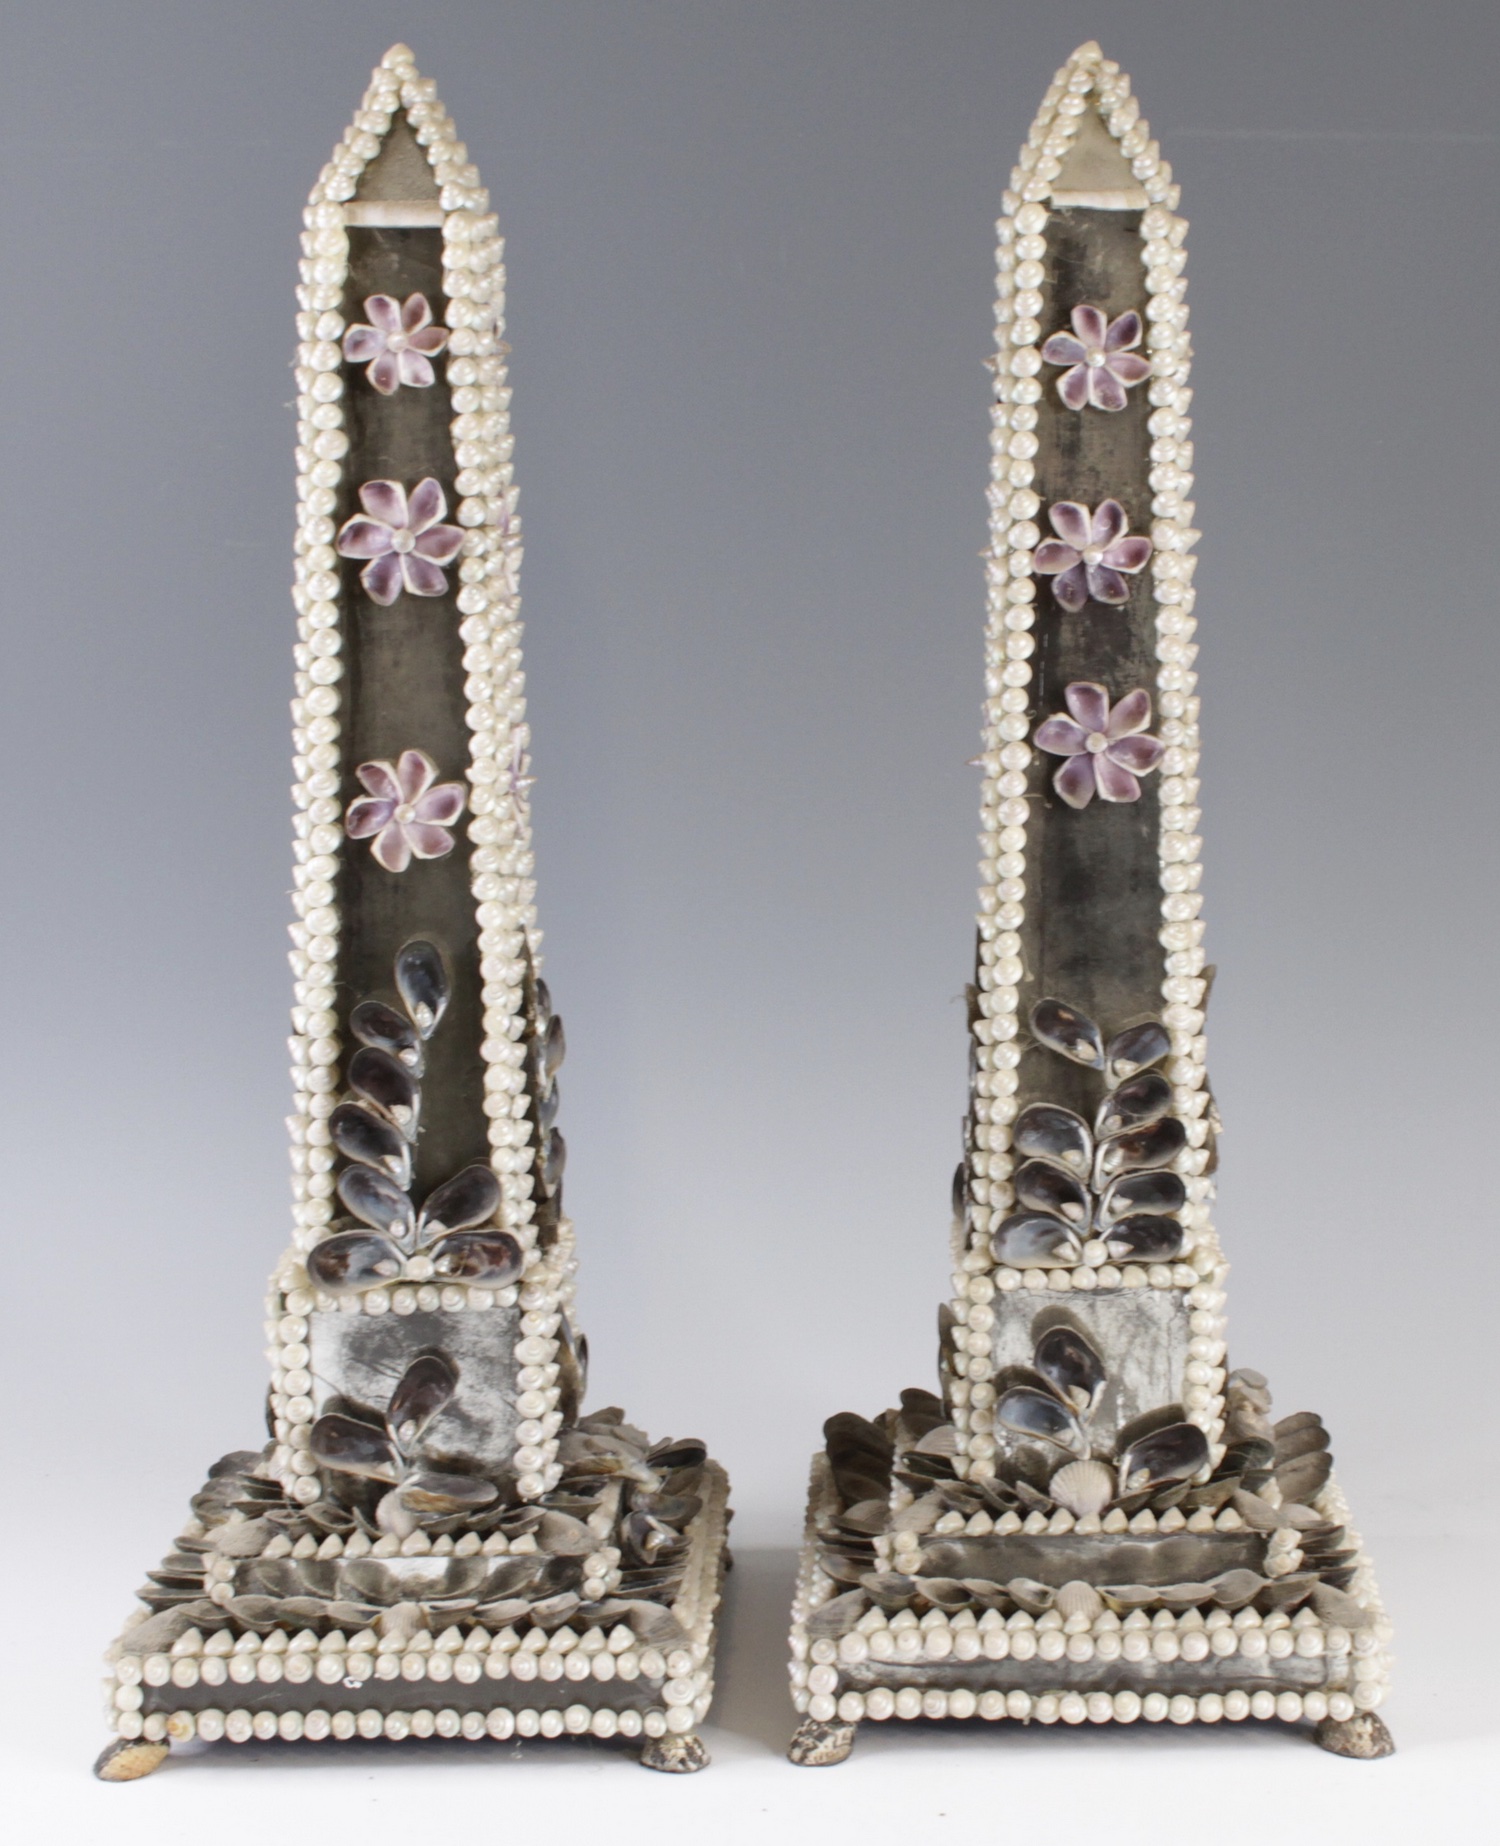 Tess Morley - A pair of shell art and mirrored obelisk, late 20th century